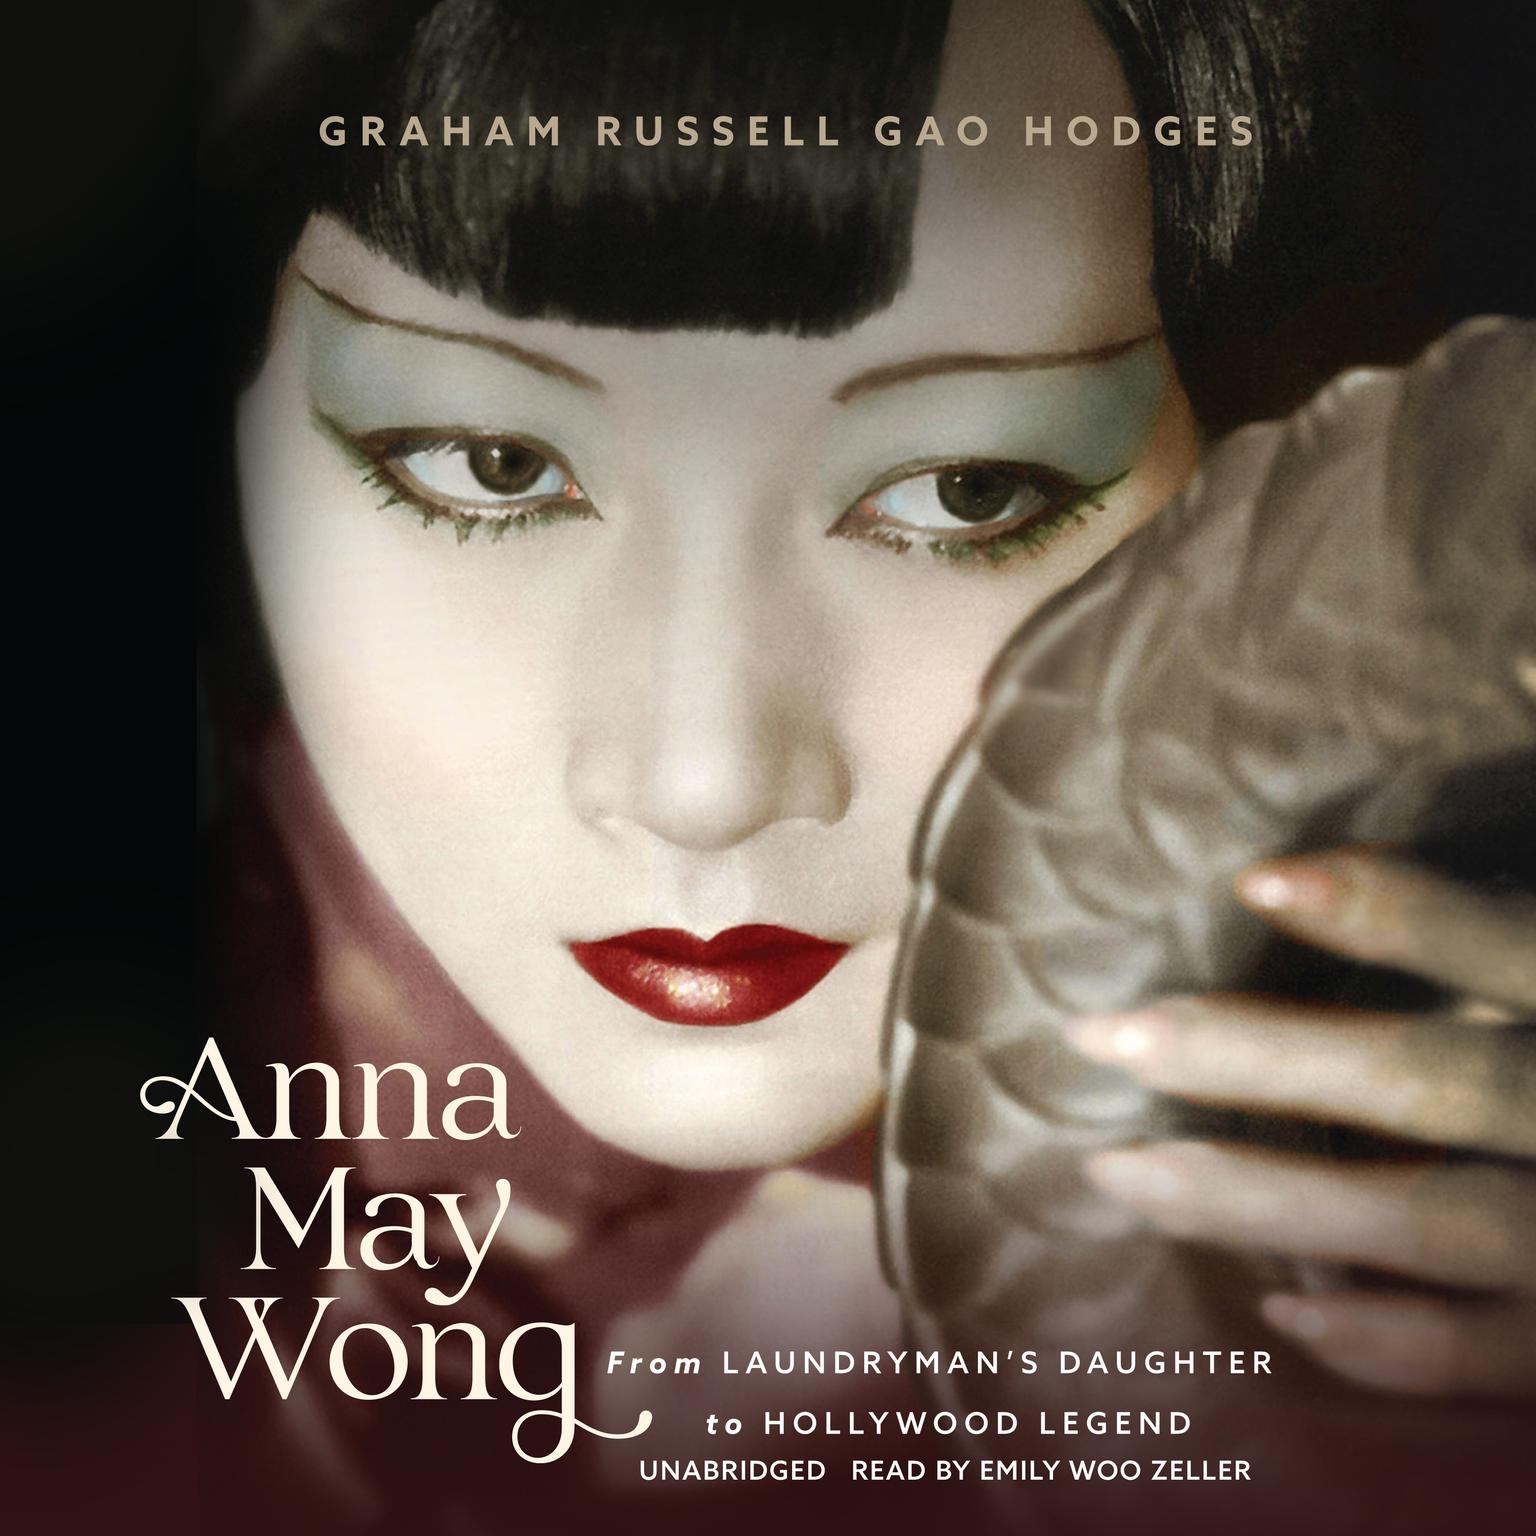 Anna May Wong: From Laundryman’s Daughter to Hollywood Legend Audiobook, by Graham Russell Gao Hodges